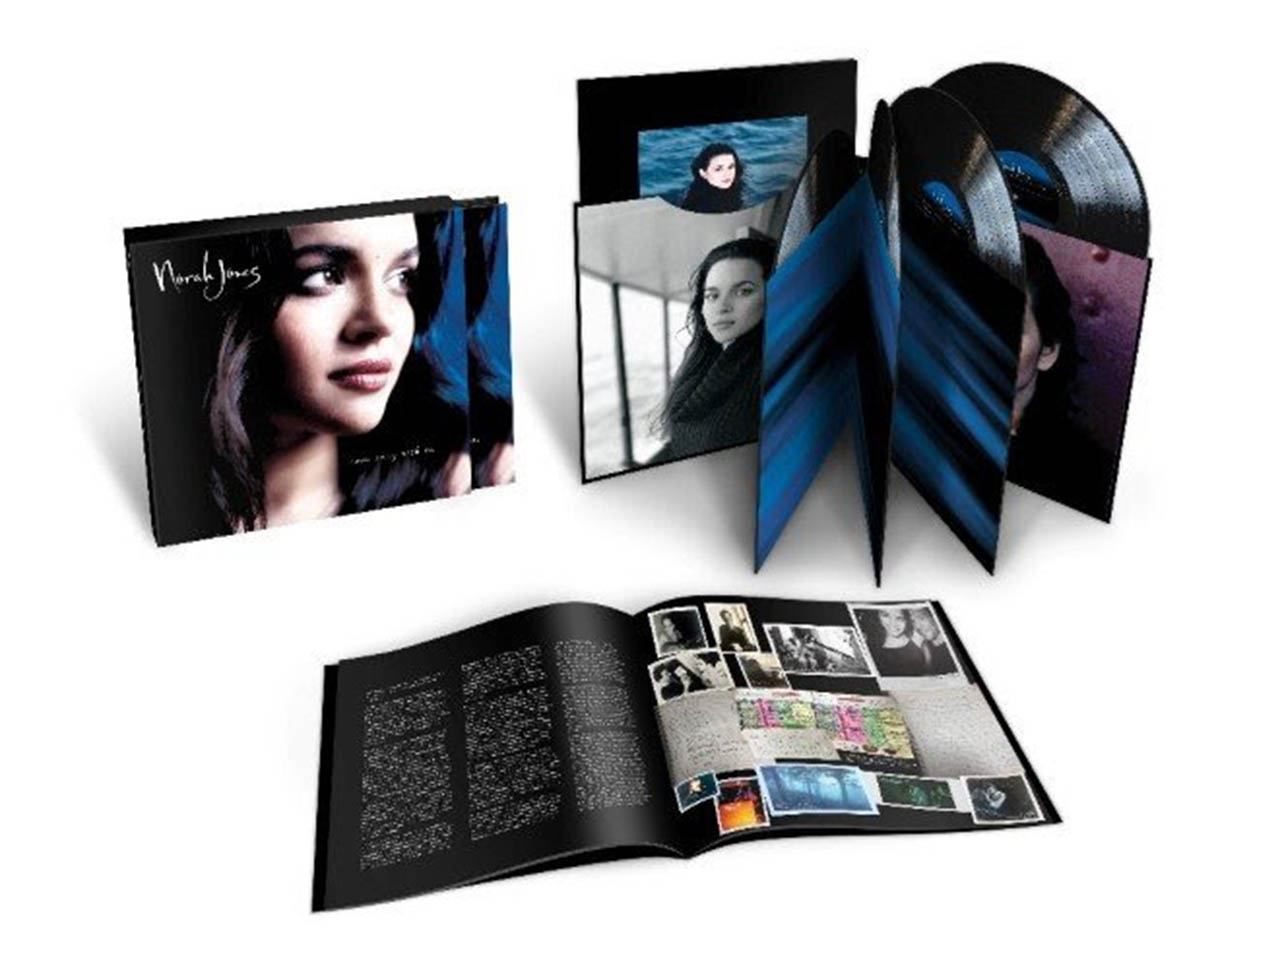 Nora Jones - Come Away With Me Super Deluxe Edition